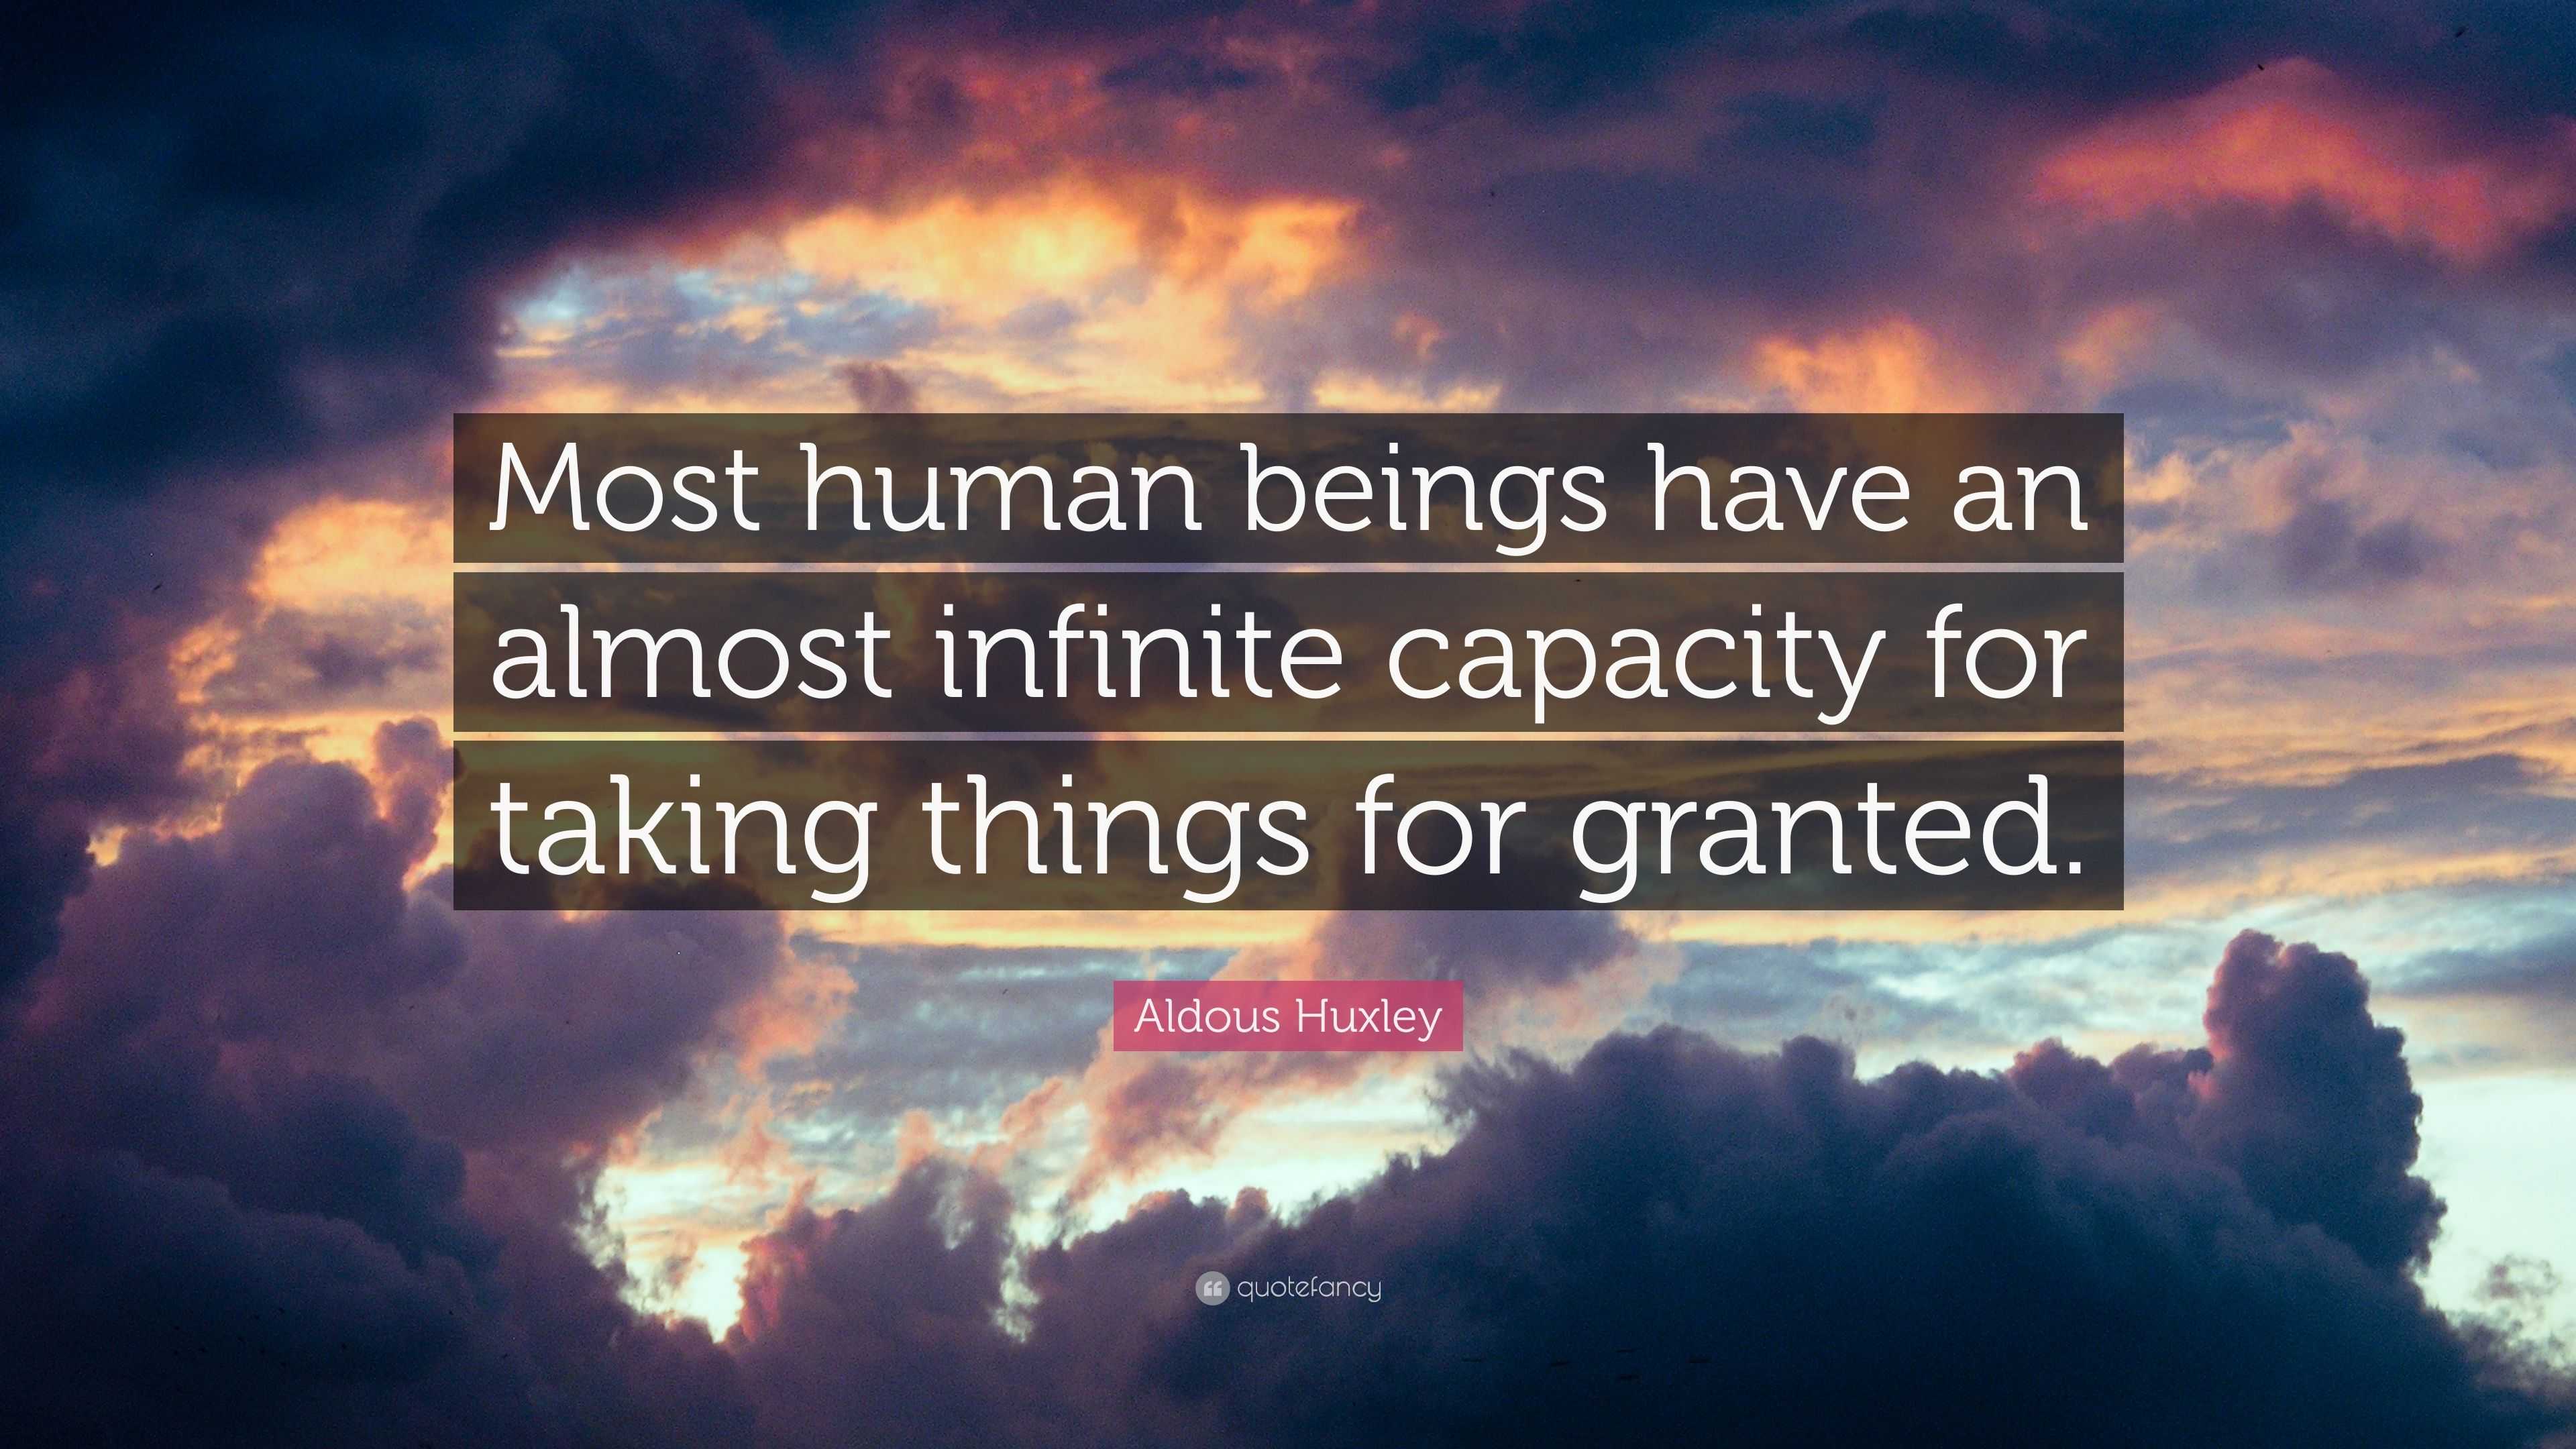 Aldous Huxley Quote: “Most human beings have an almost infinite